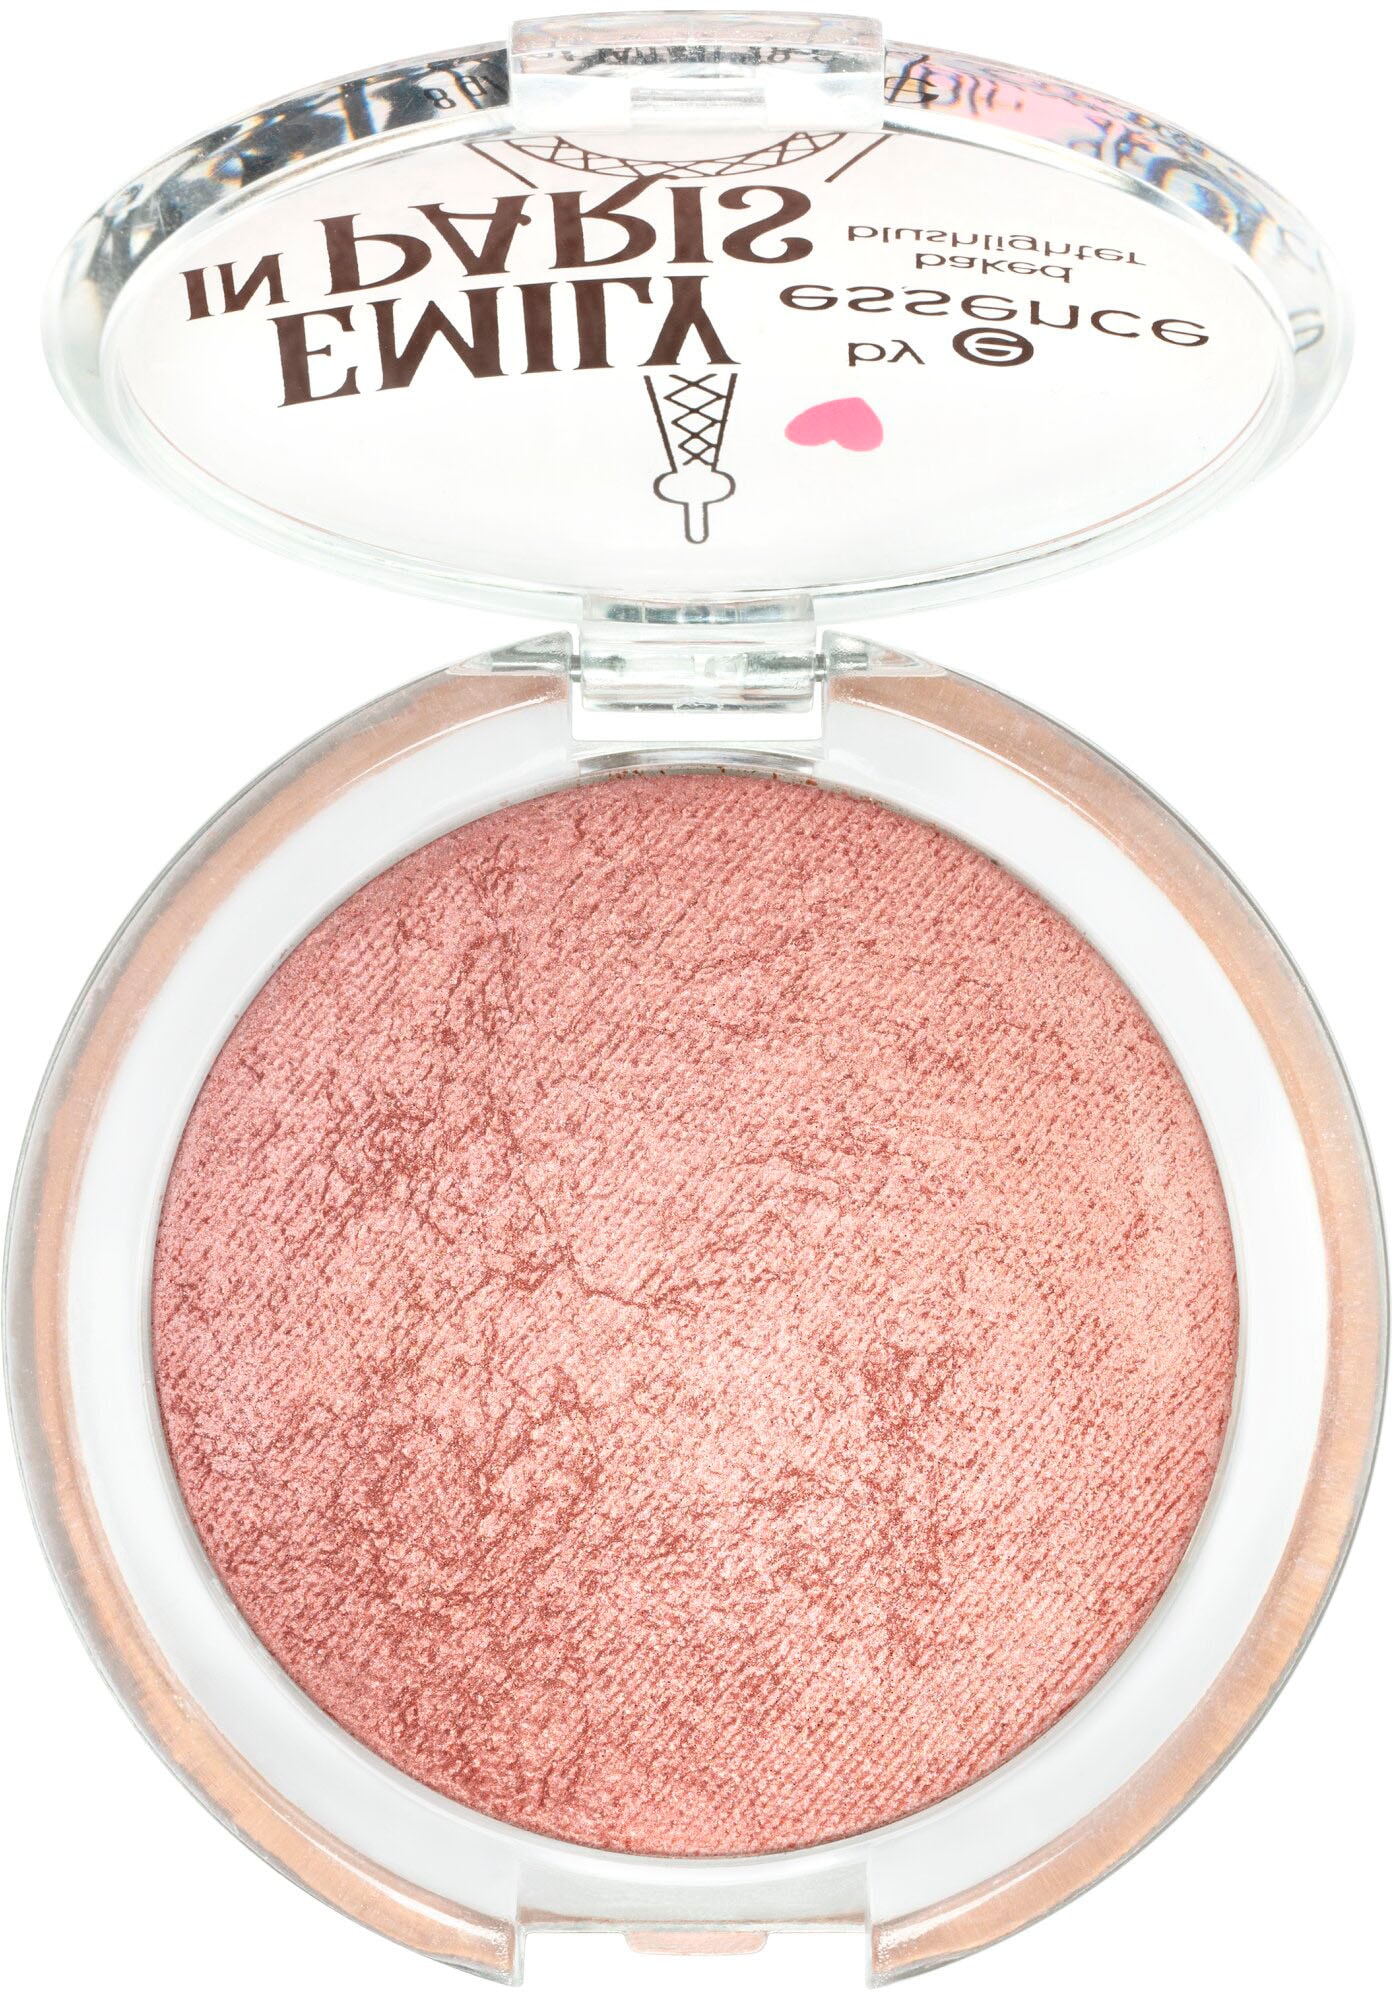 »EMILY bei baked by Rouge blushlighter« PARIS online IN essence Essence